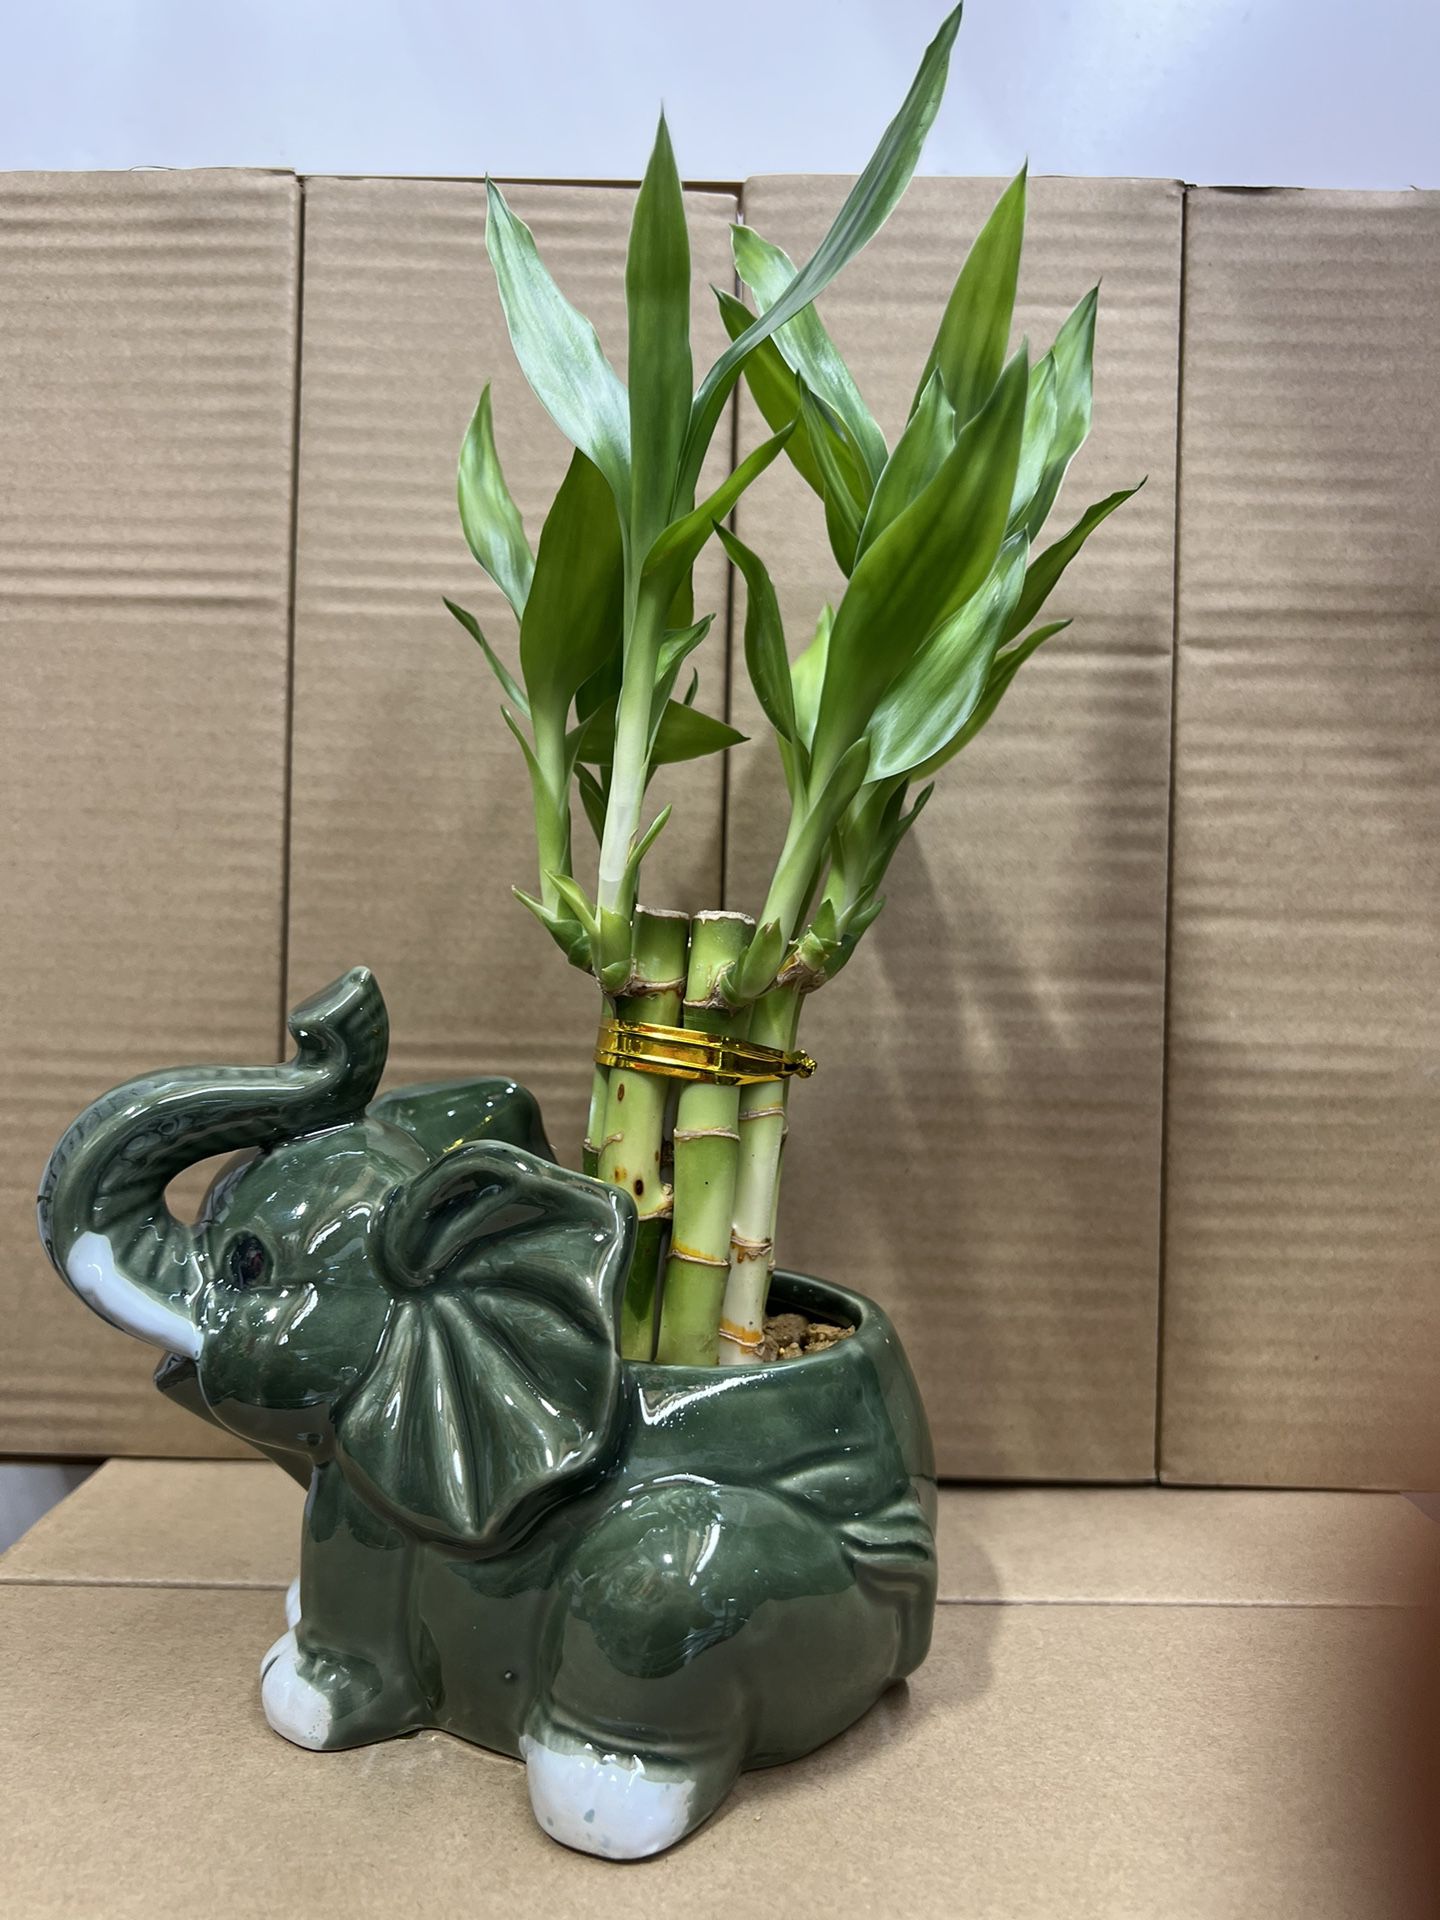 Bamboo Plant With Vase 